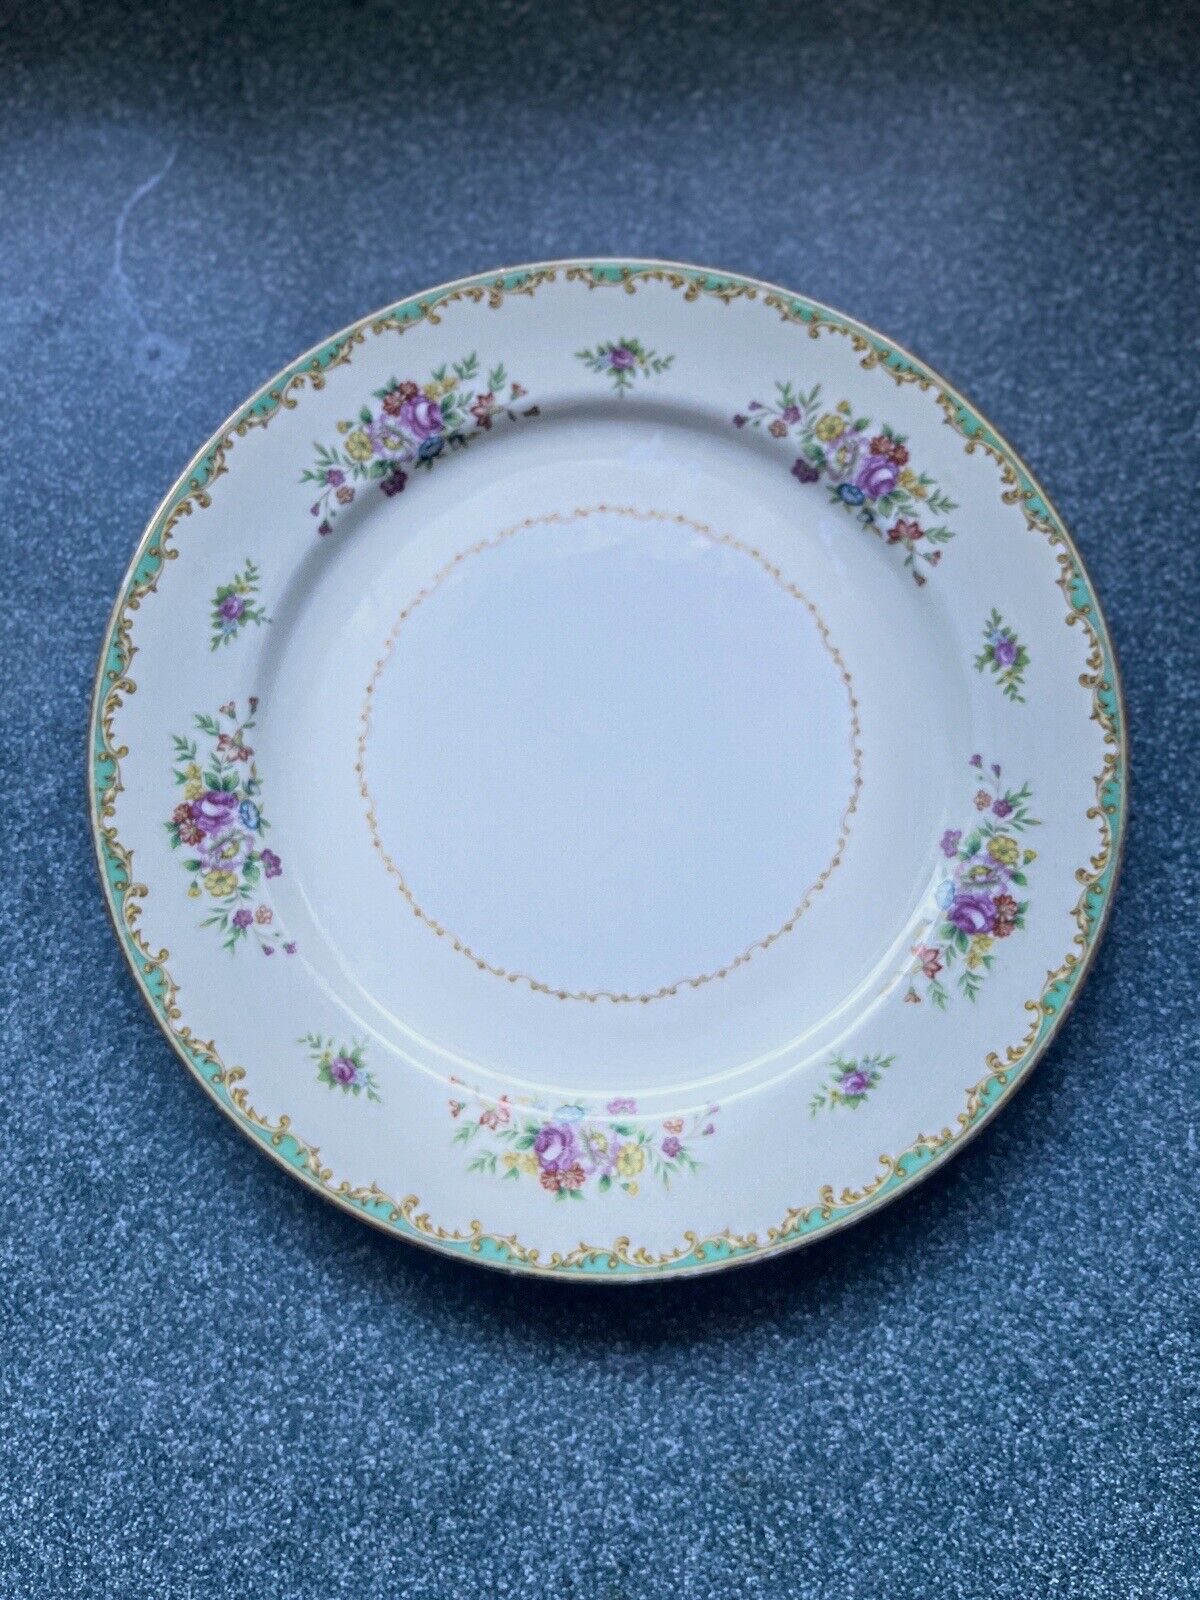 Noritake Antique Luncheon Plate With Authentic Back Stamp